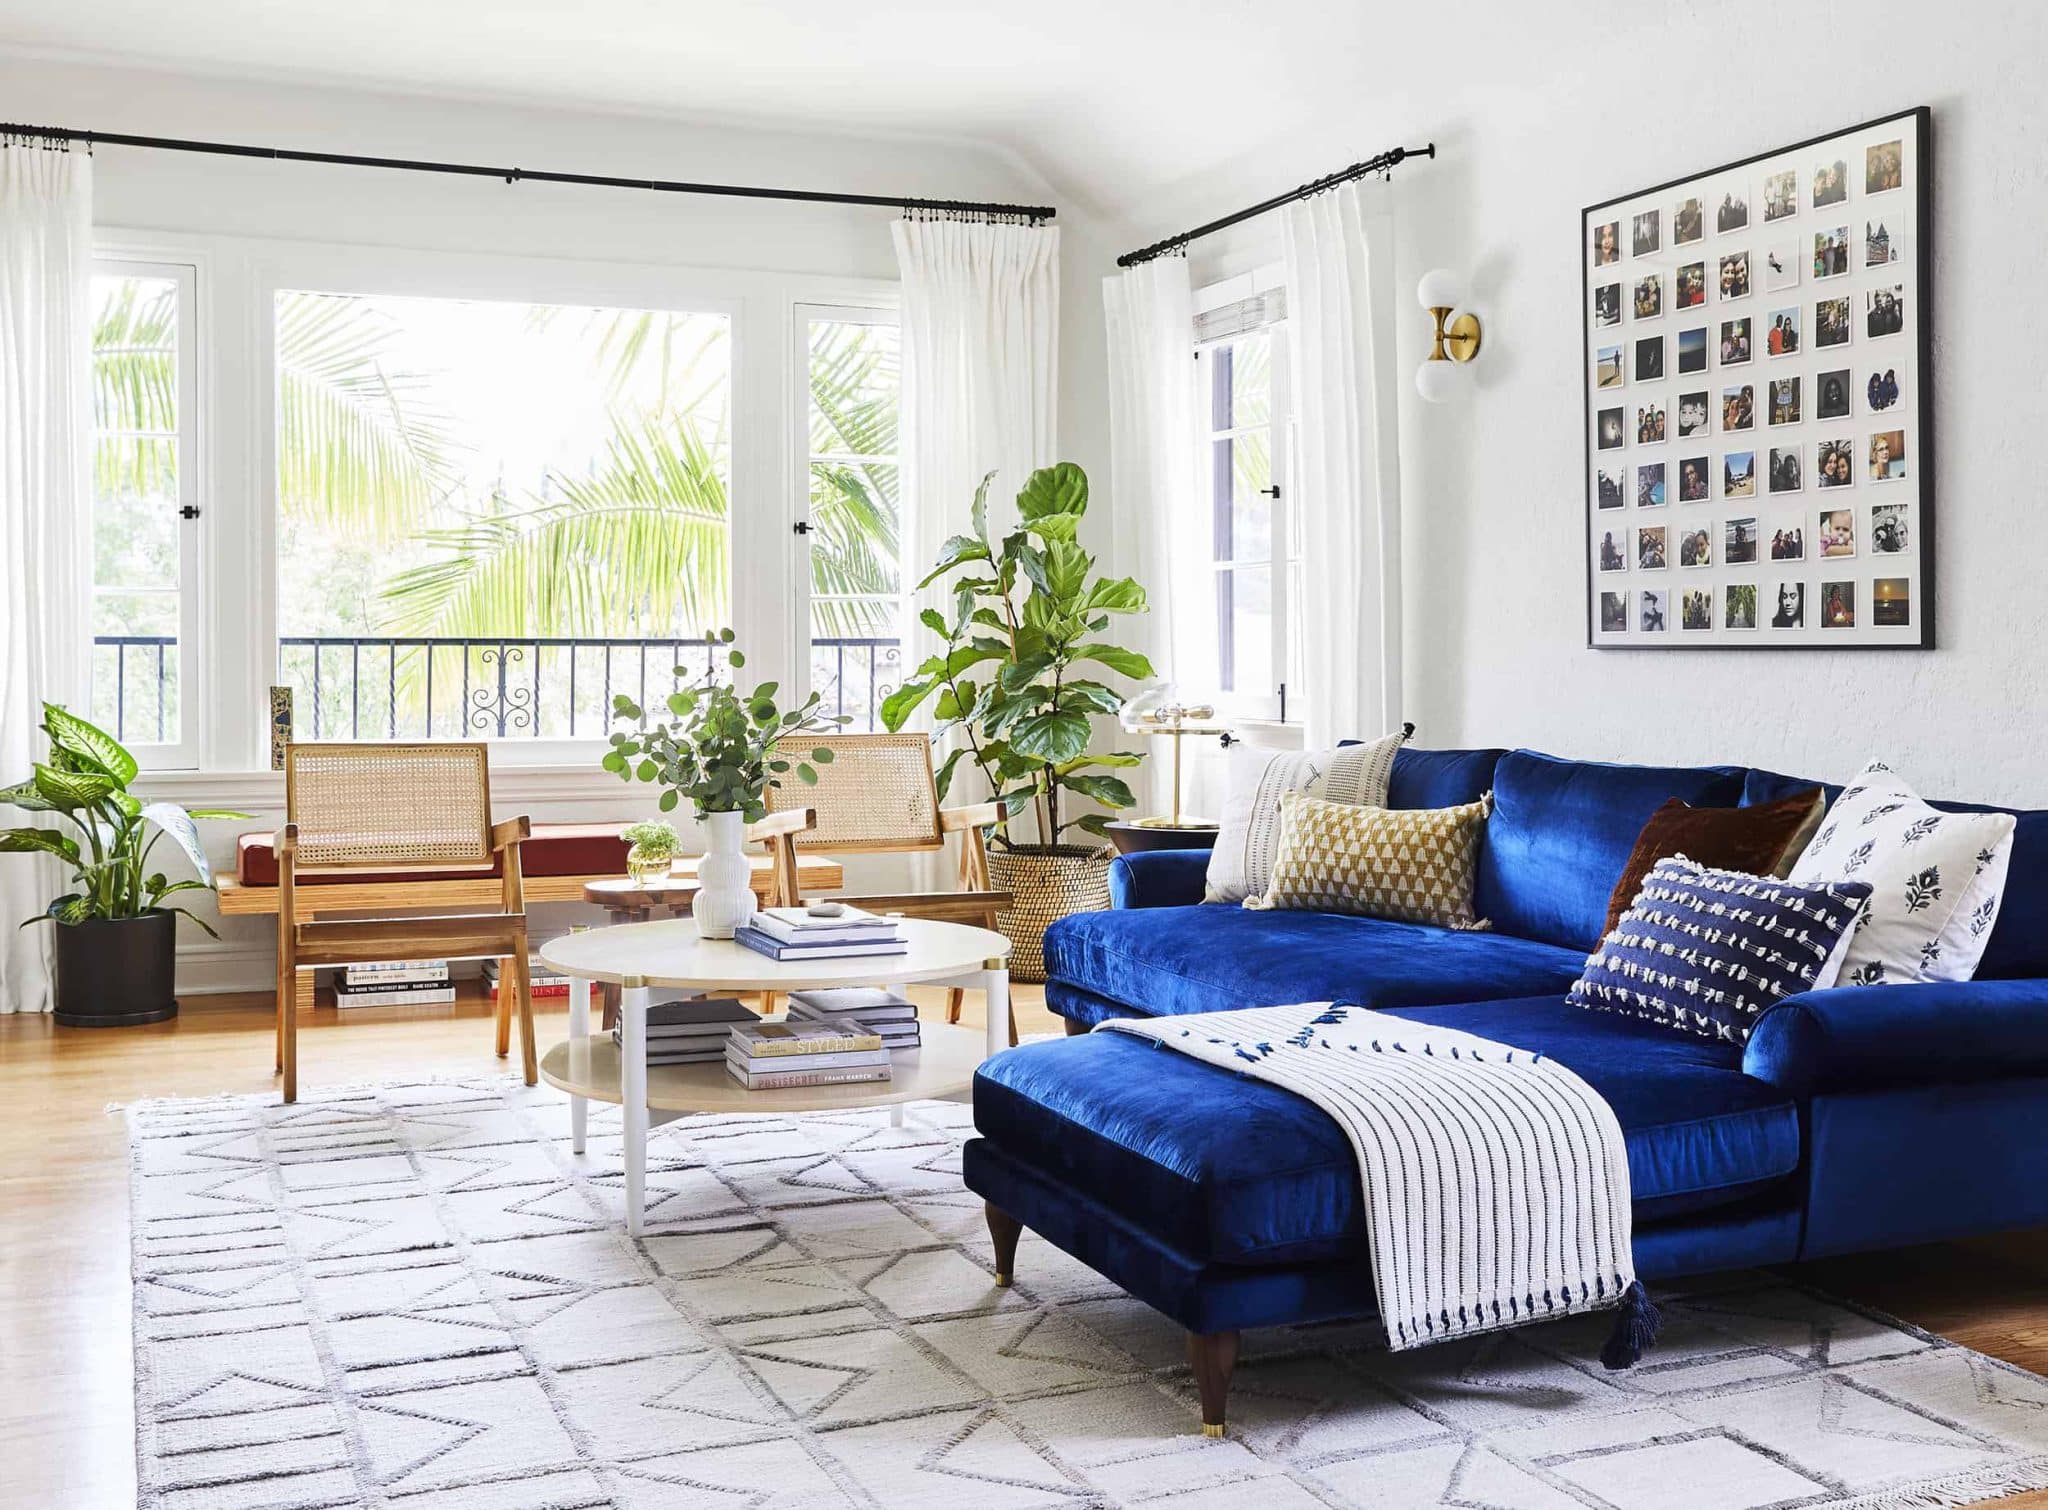 Open Space Living Room Interior with a Navy Blue Sofa and an Armchair. Rug  on the Floor and Graphic Decorations on the Wall Stock Image - Image of  living, inside: 127604013